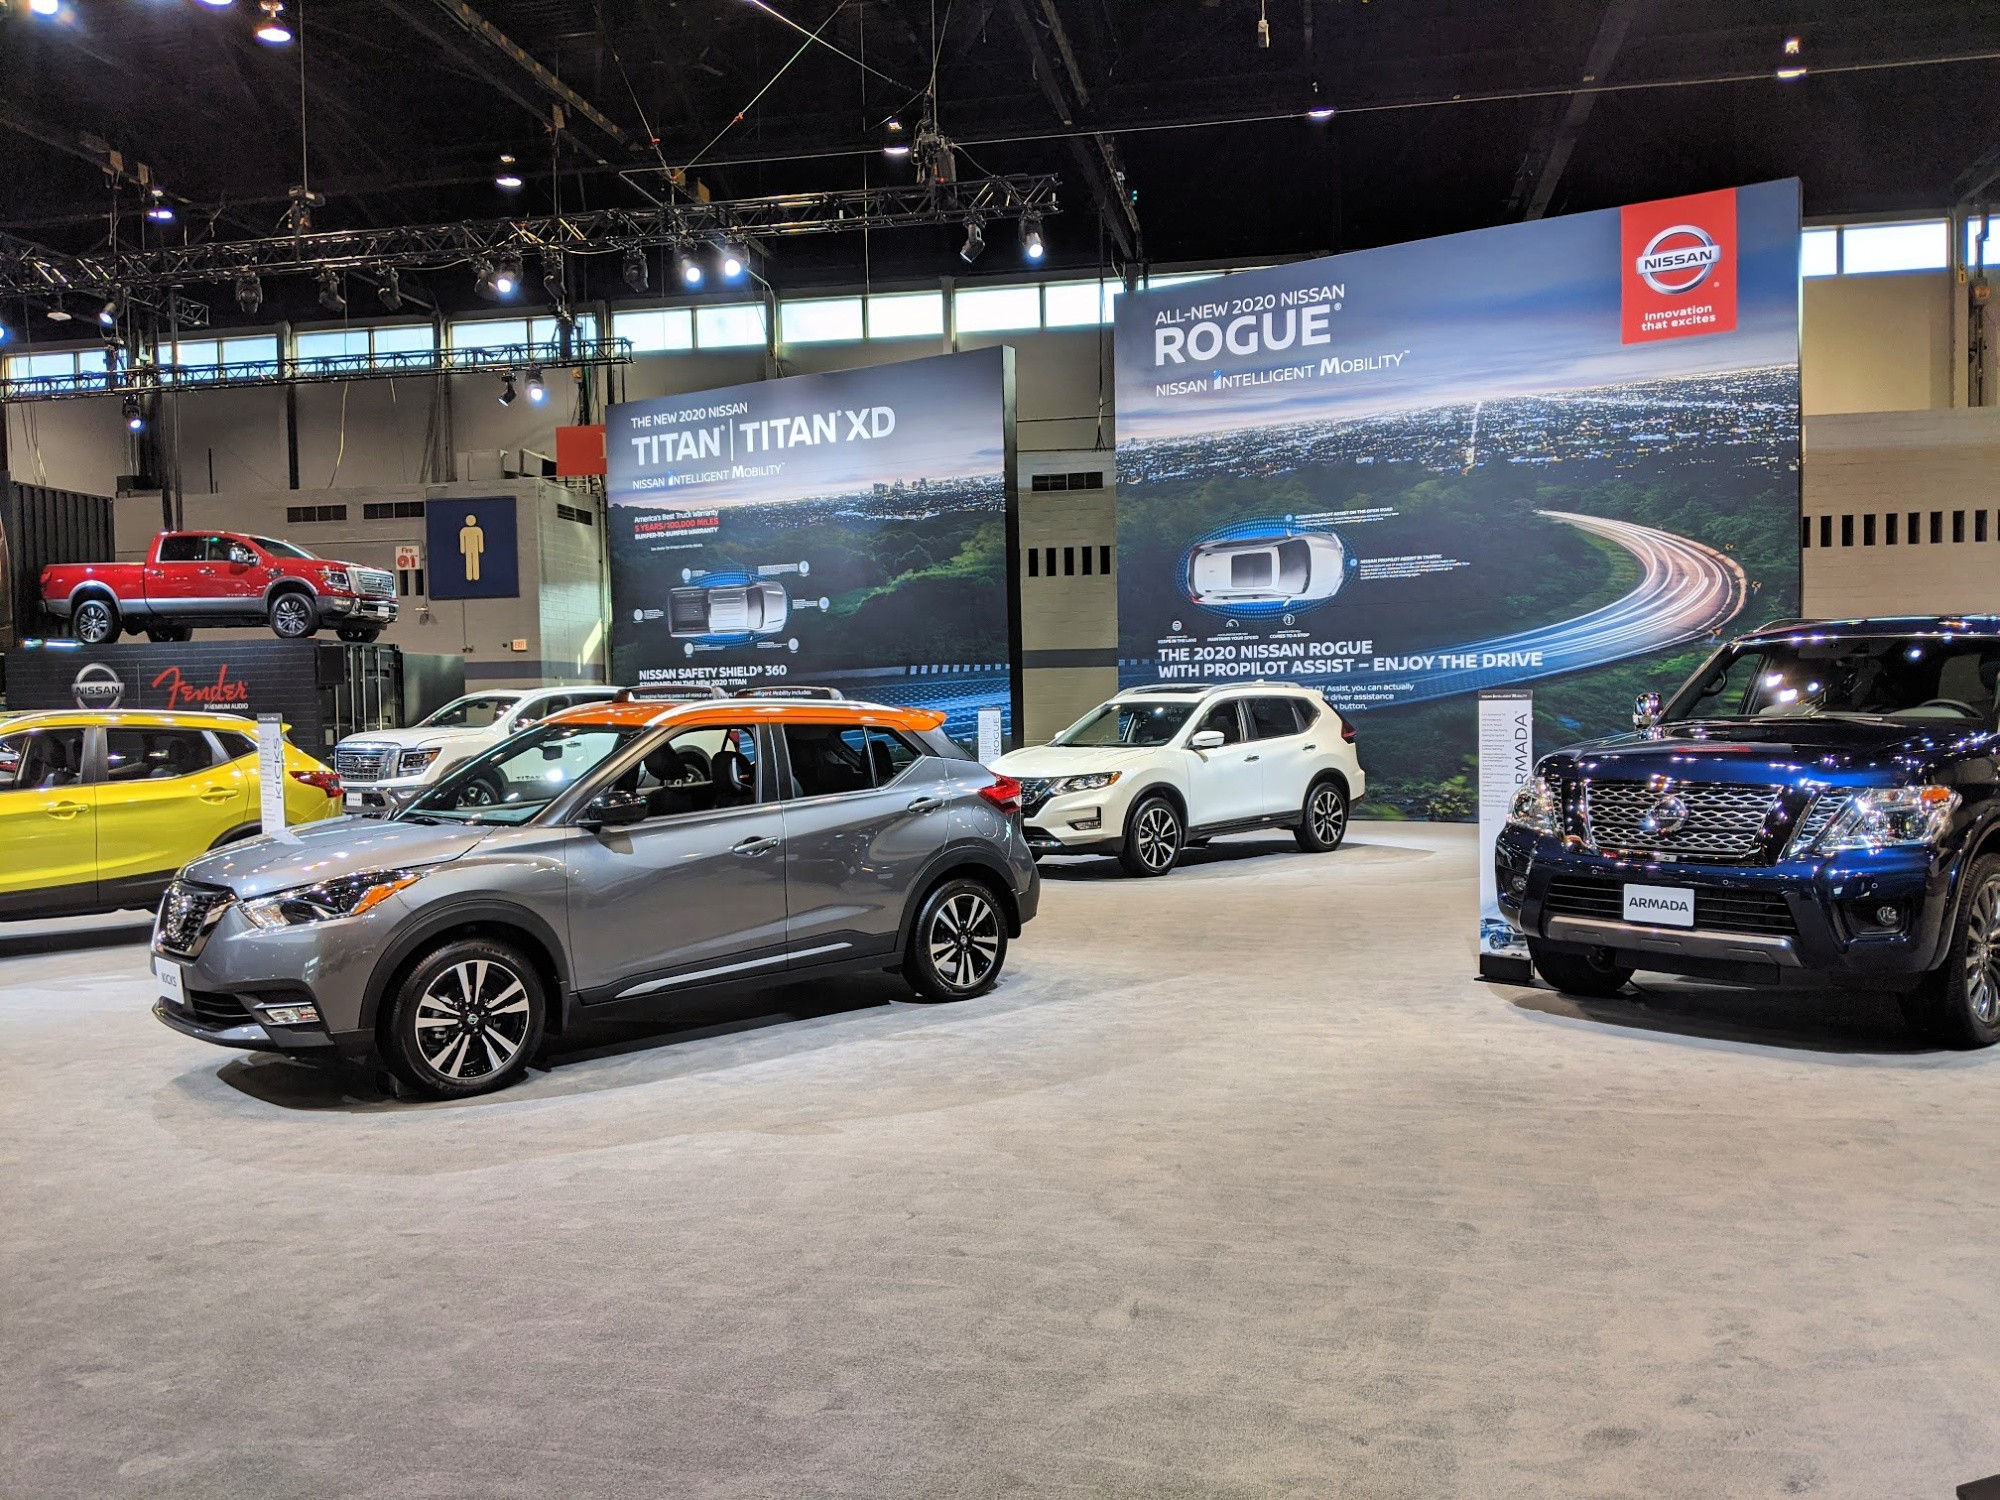 Nissan at Chicago Auto Show 2020